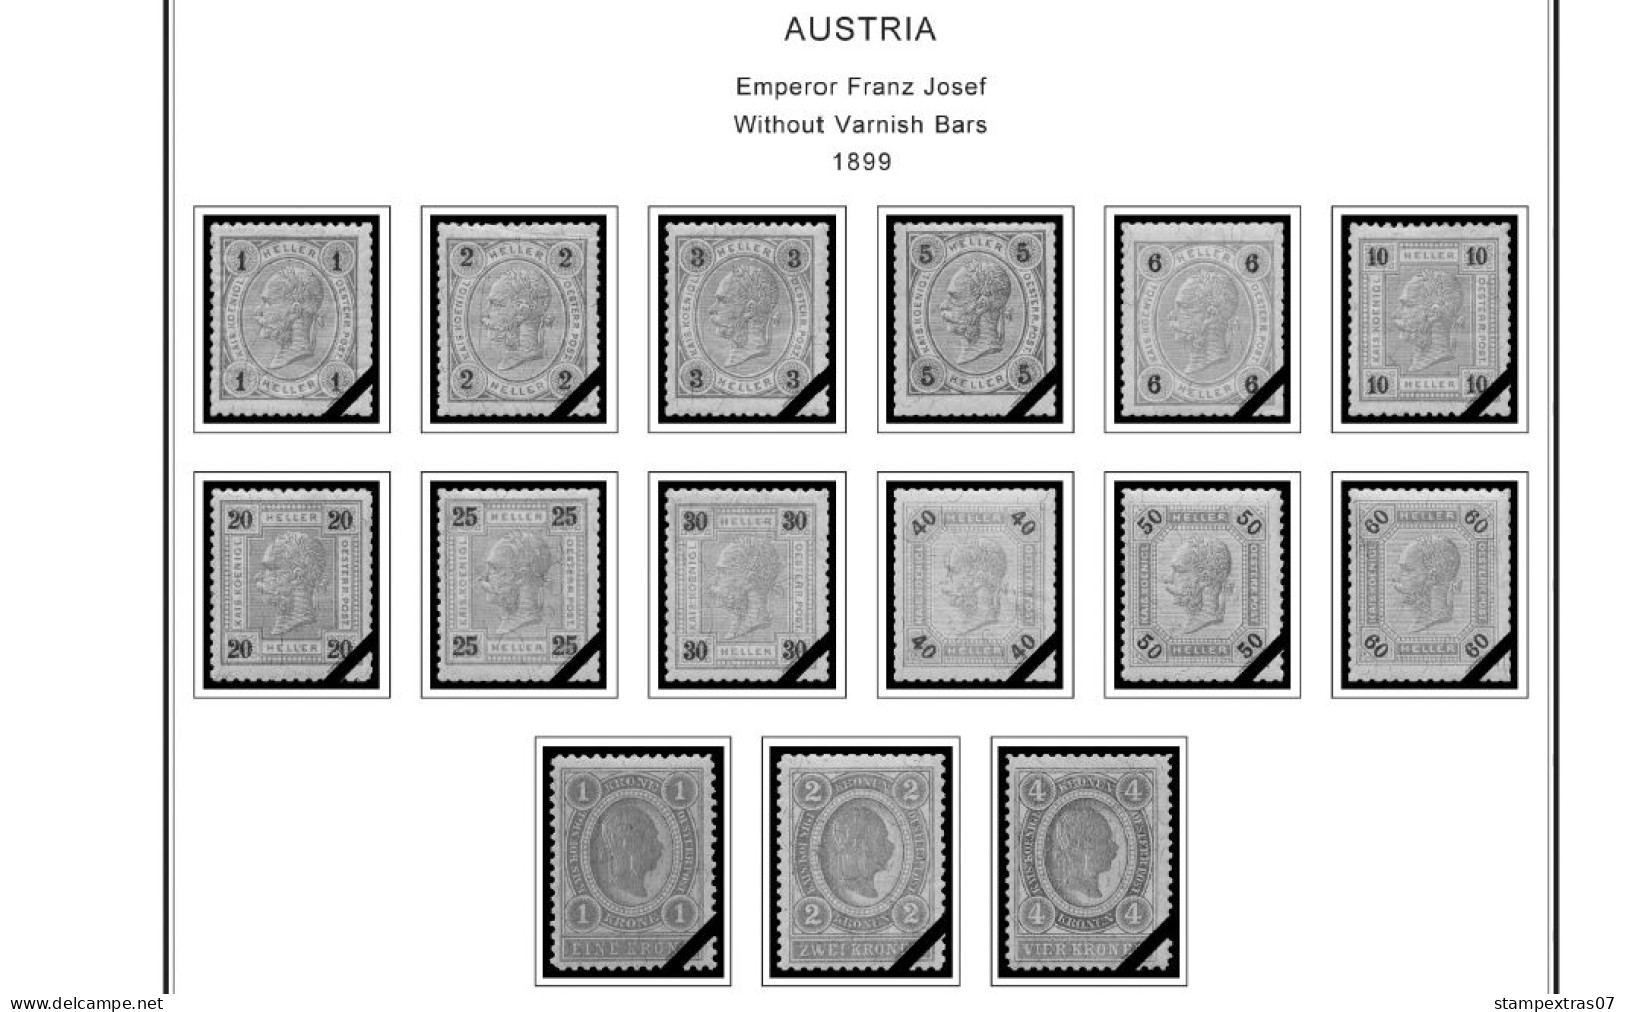 AUSTRIA 1850-2010 + 2011-2020 STAMP ALBUM PAGES (417 B&w Illustrated Pages) - English